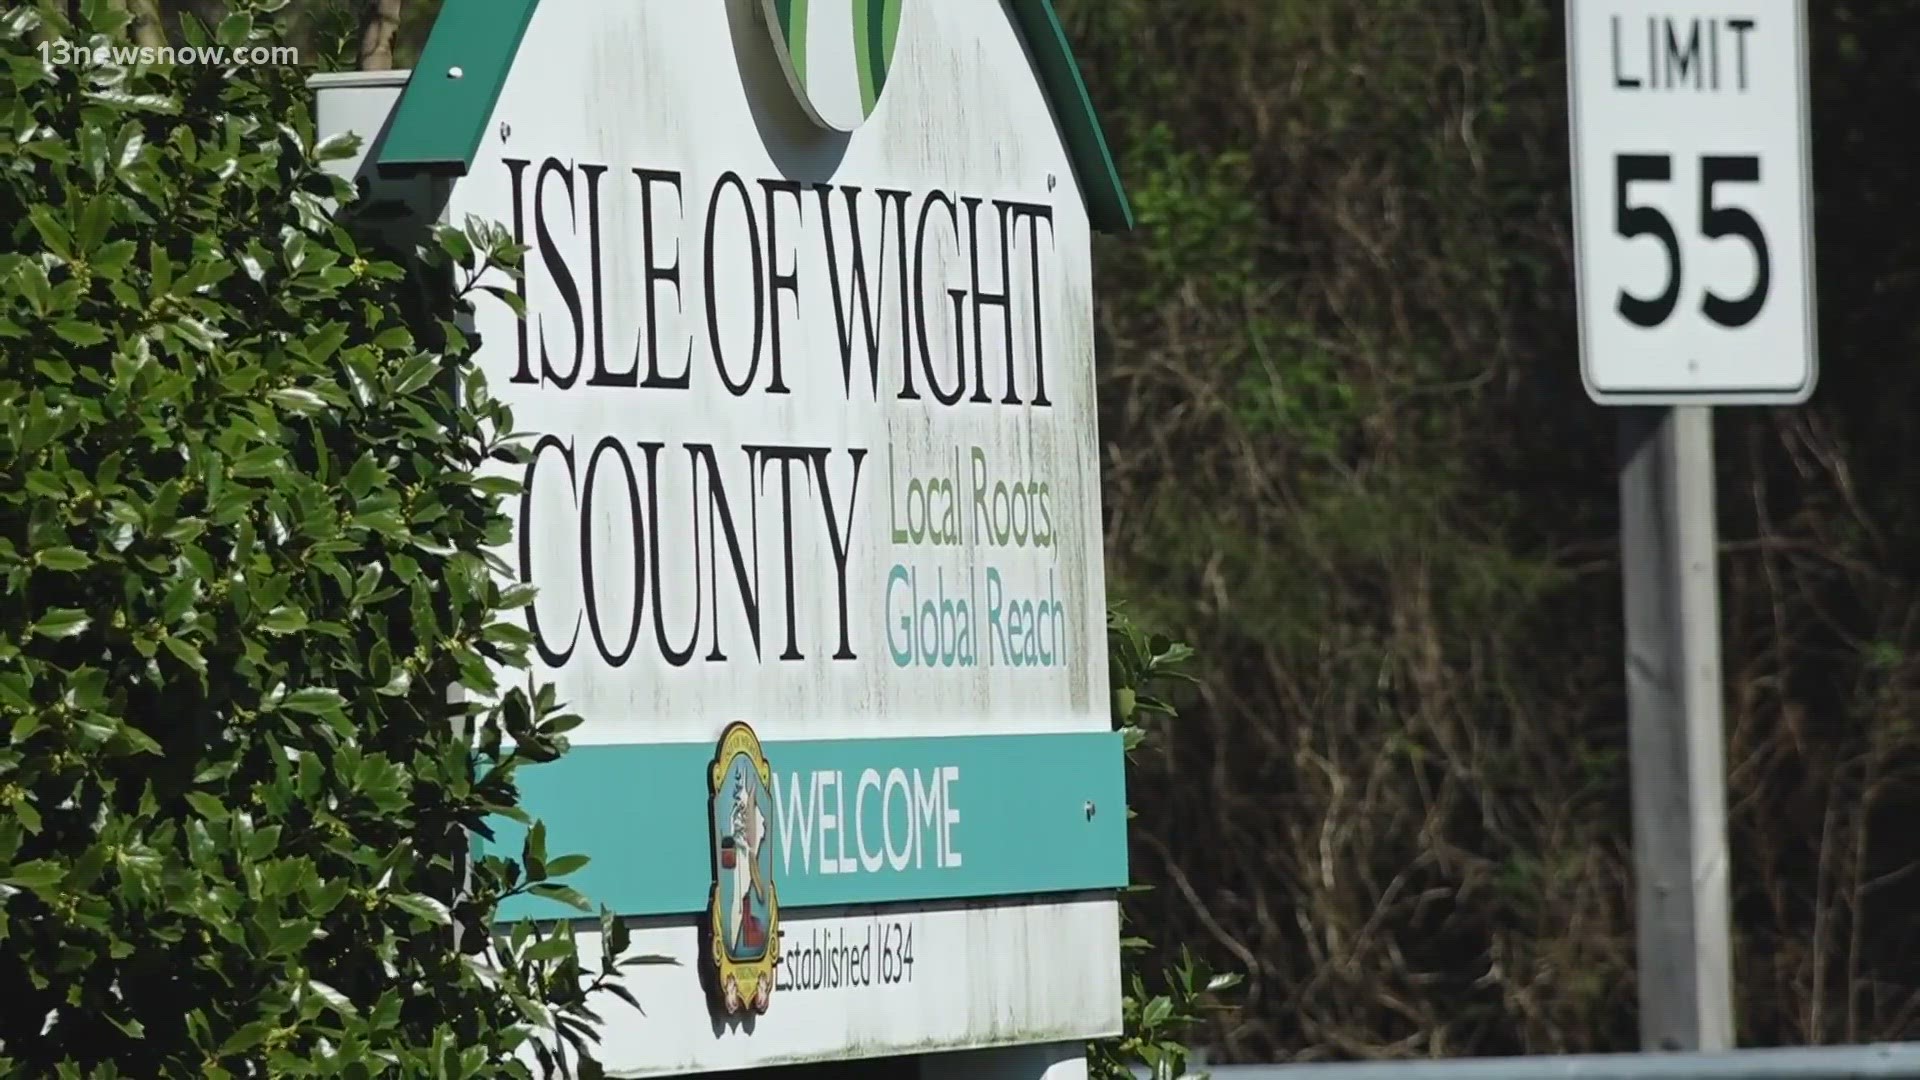 The Isle of Wight School Division is making headlines after voting to change how systemic racism is taught in their schools.